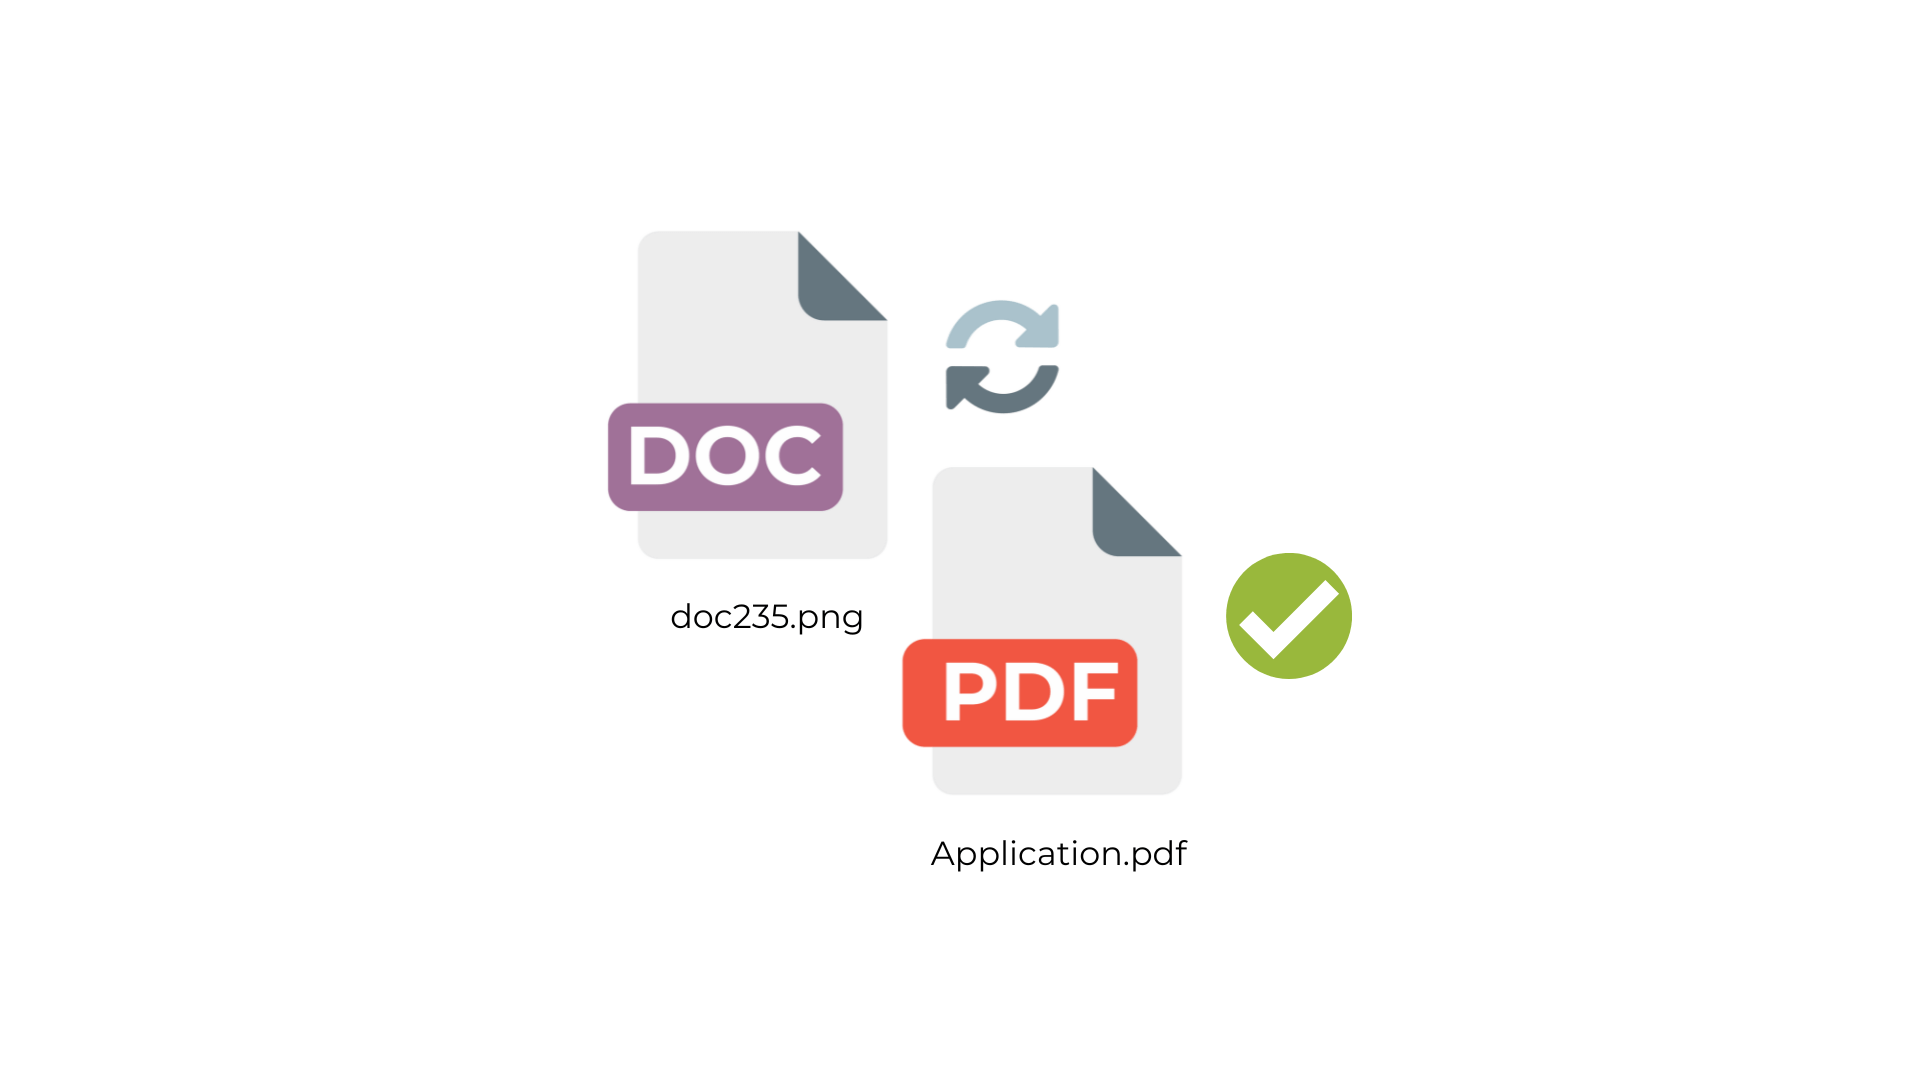 FileInvite - PDF Convert and Naming Conventions (DOC)